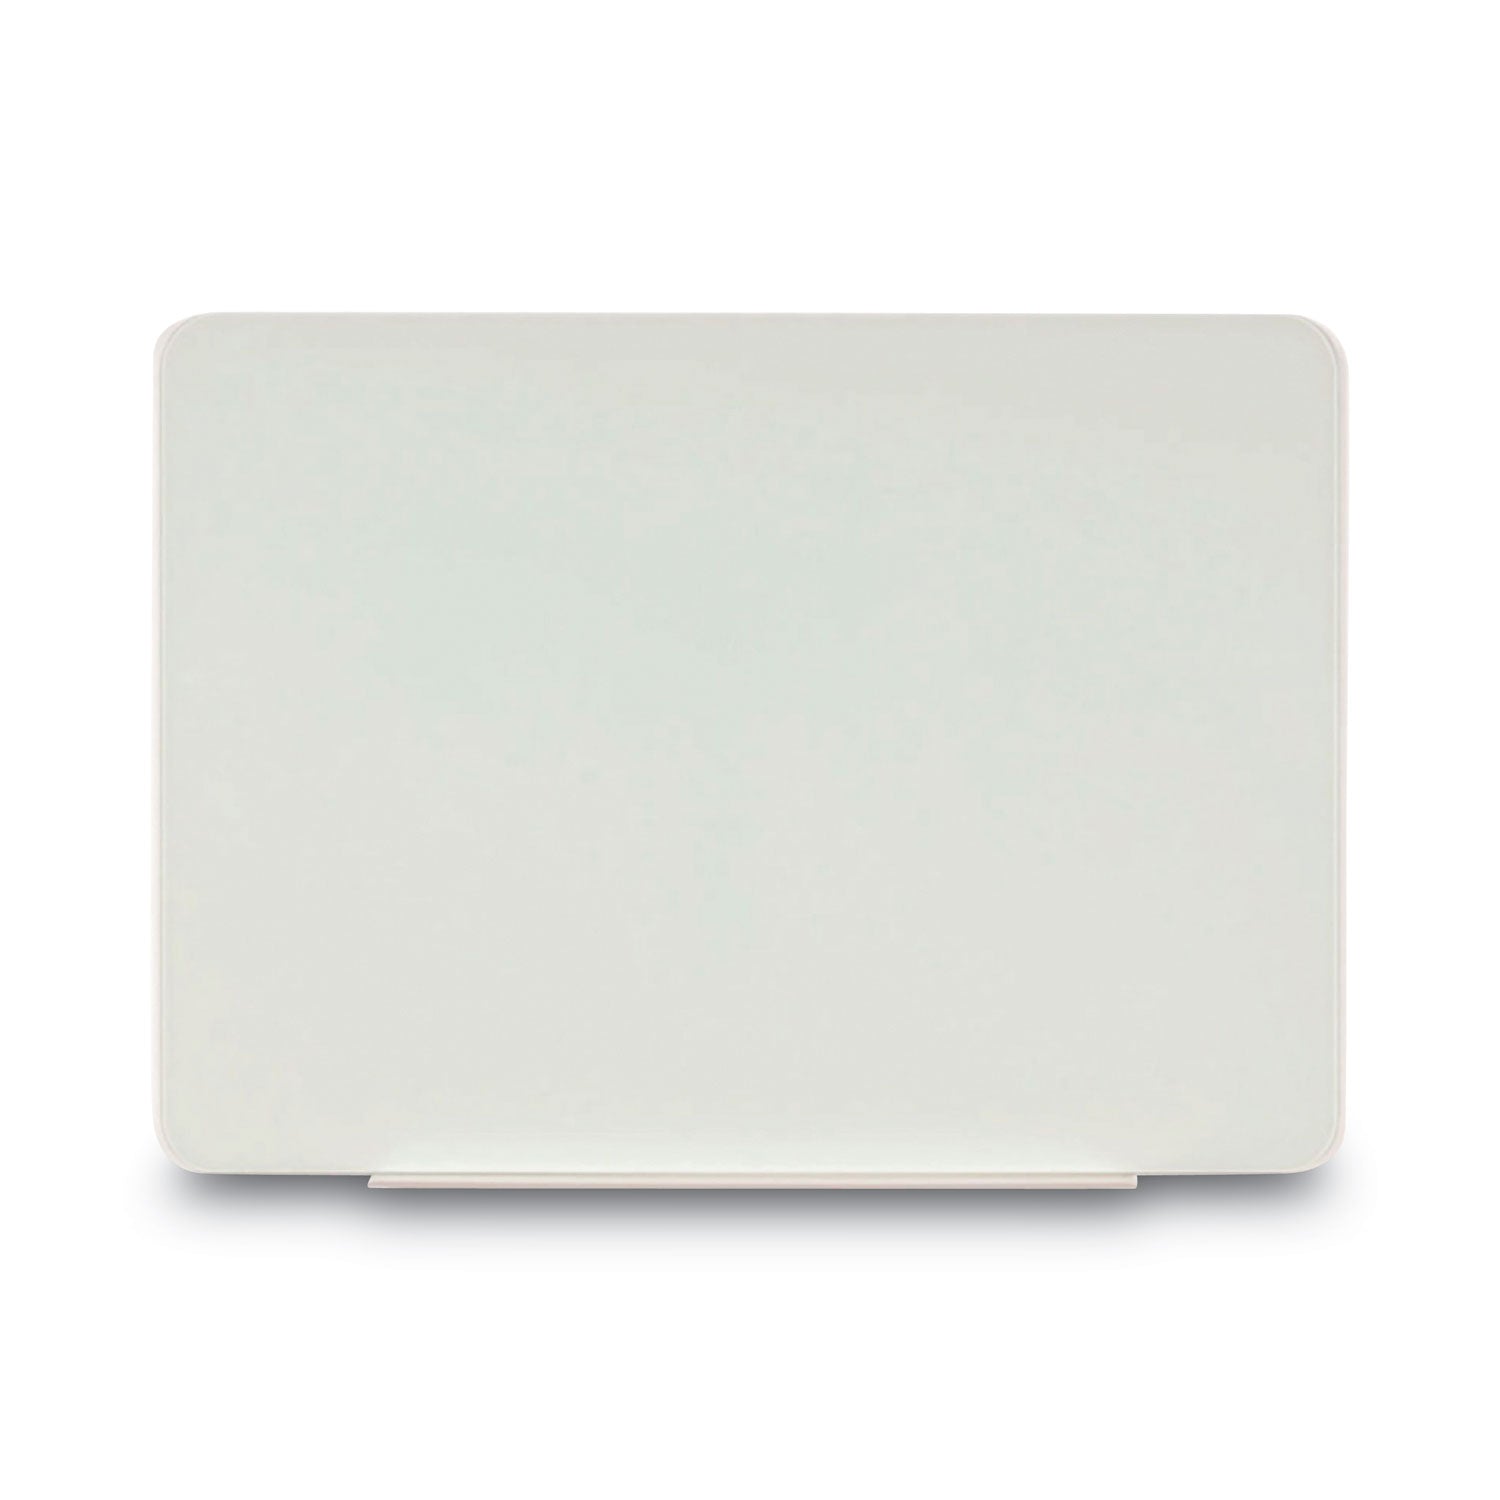 magnetic-glass-dry-erase-board-60-x-48-opaque-white-surface_bvcgl110101 - 1